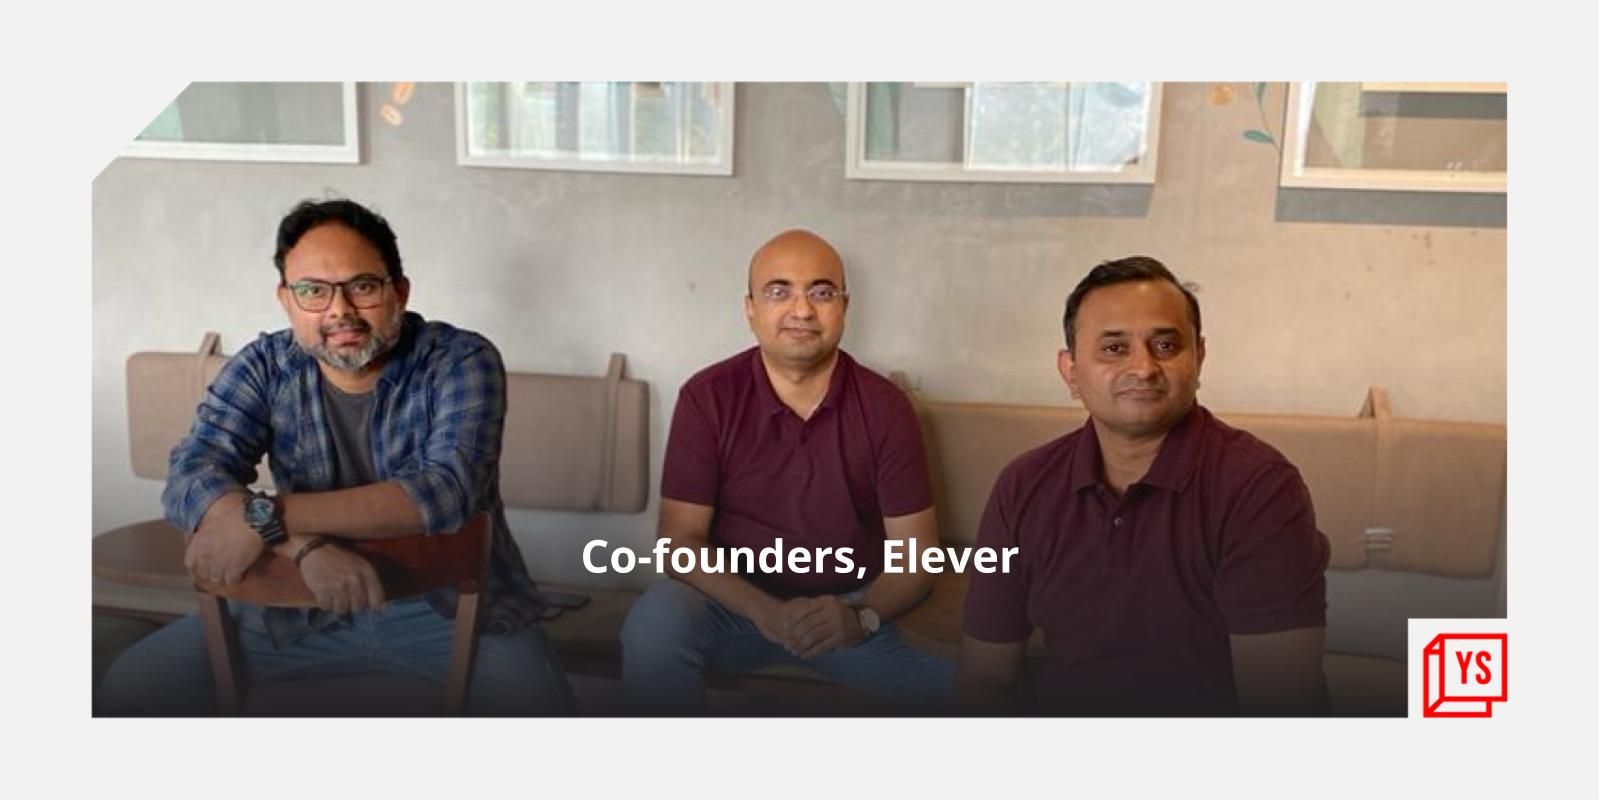 [YS Exclusive] Investment app Elever raises pre-seed round of $750K from angel investors